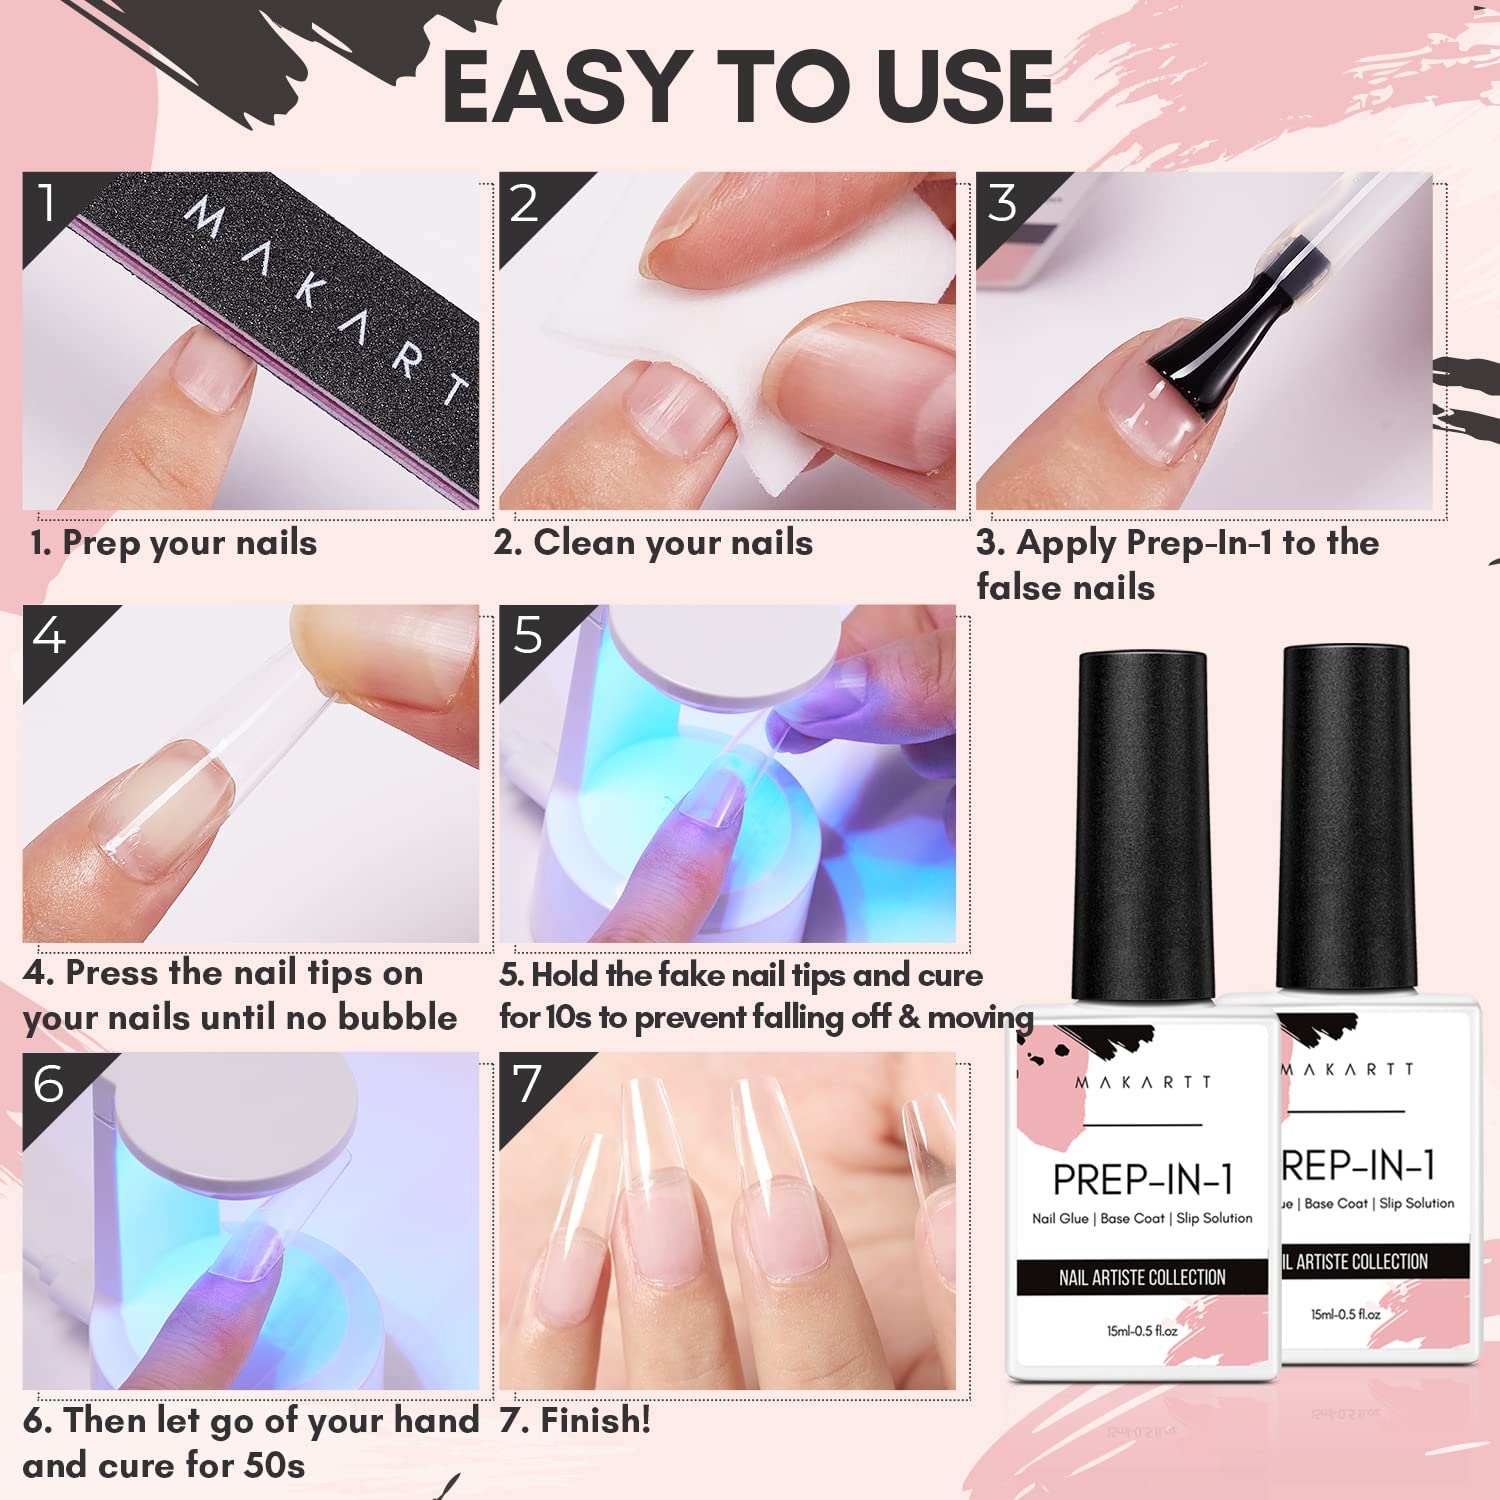 UV Lamps for Nail Gels – Facts, Science, and Common Sense | RadTech